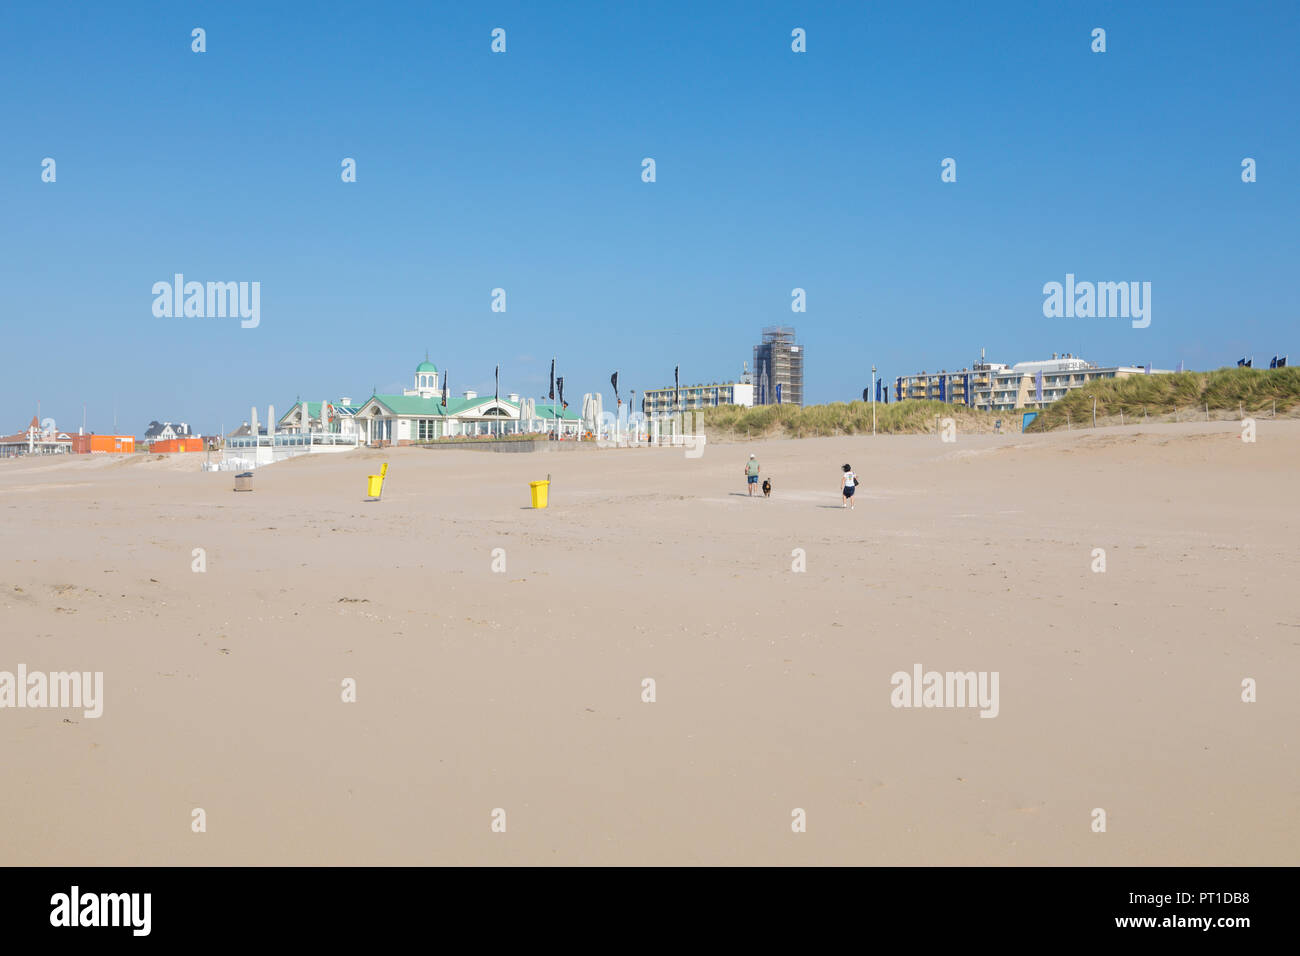 Beach of Noordwijk aan Zee, The Netherlands, with beach clubs in the dunes and hotels in the background Stock Photo